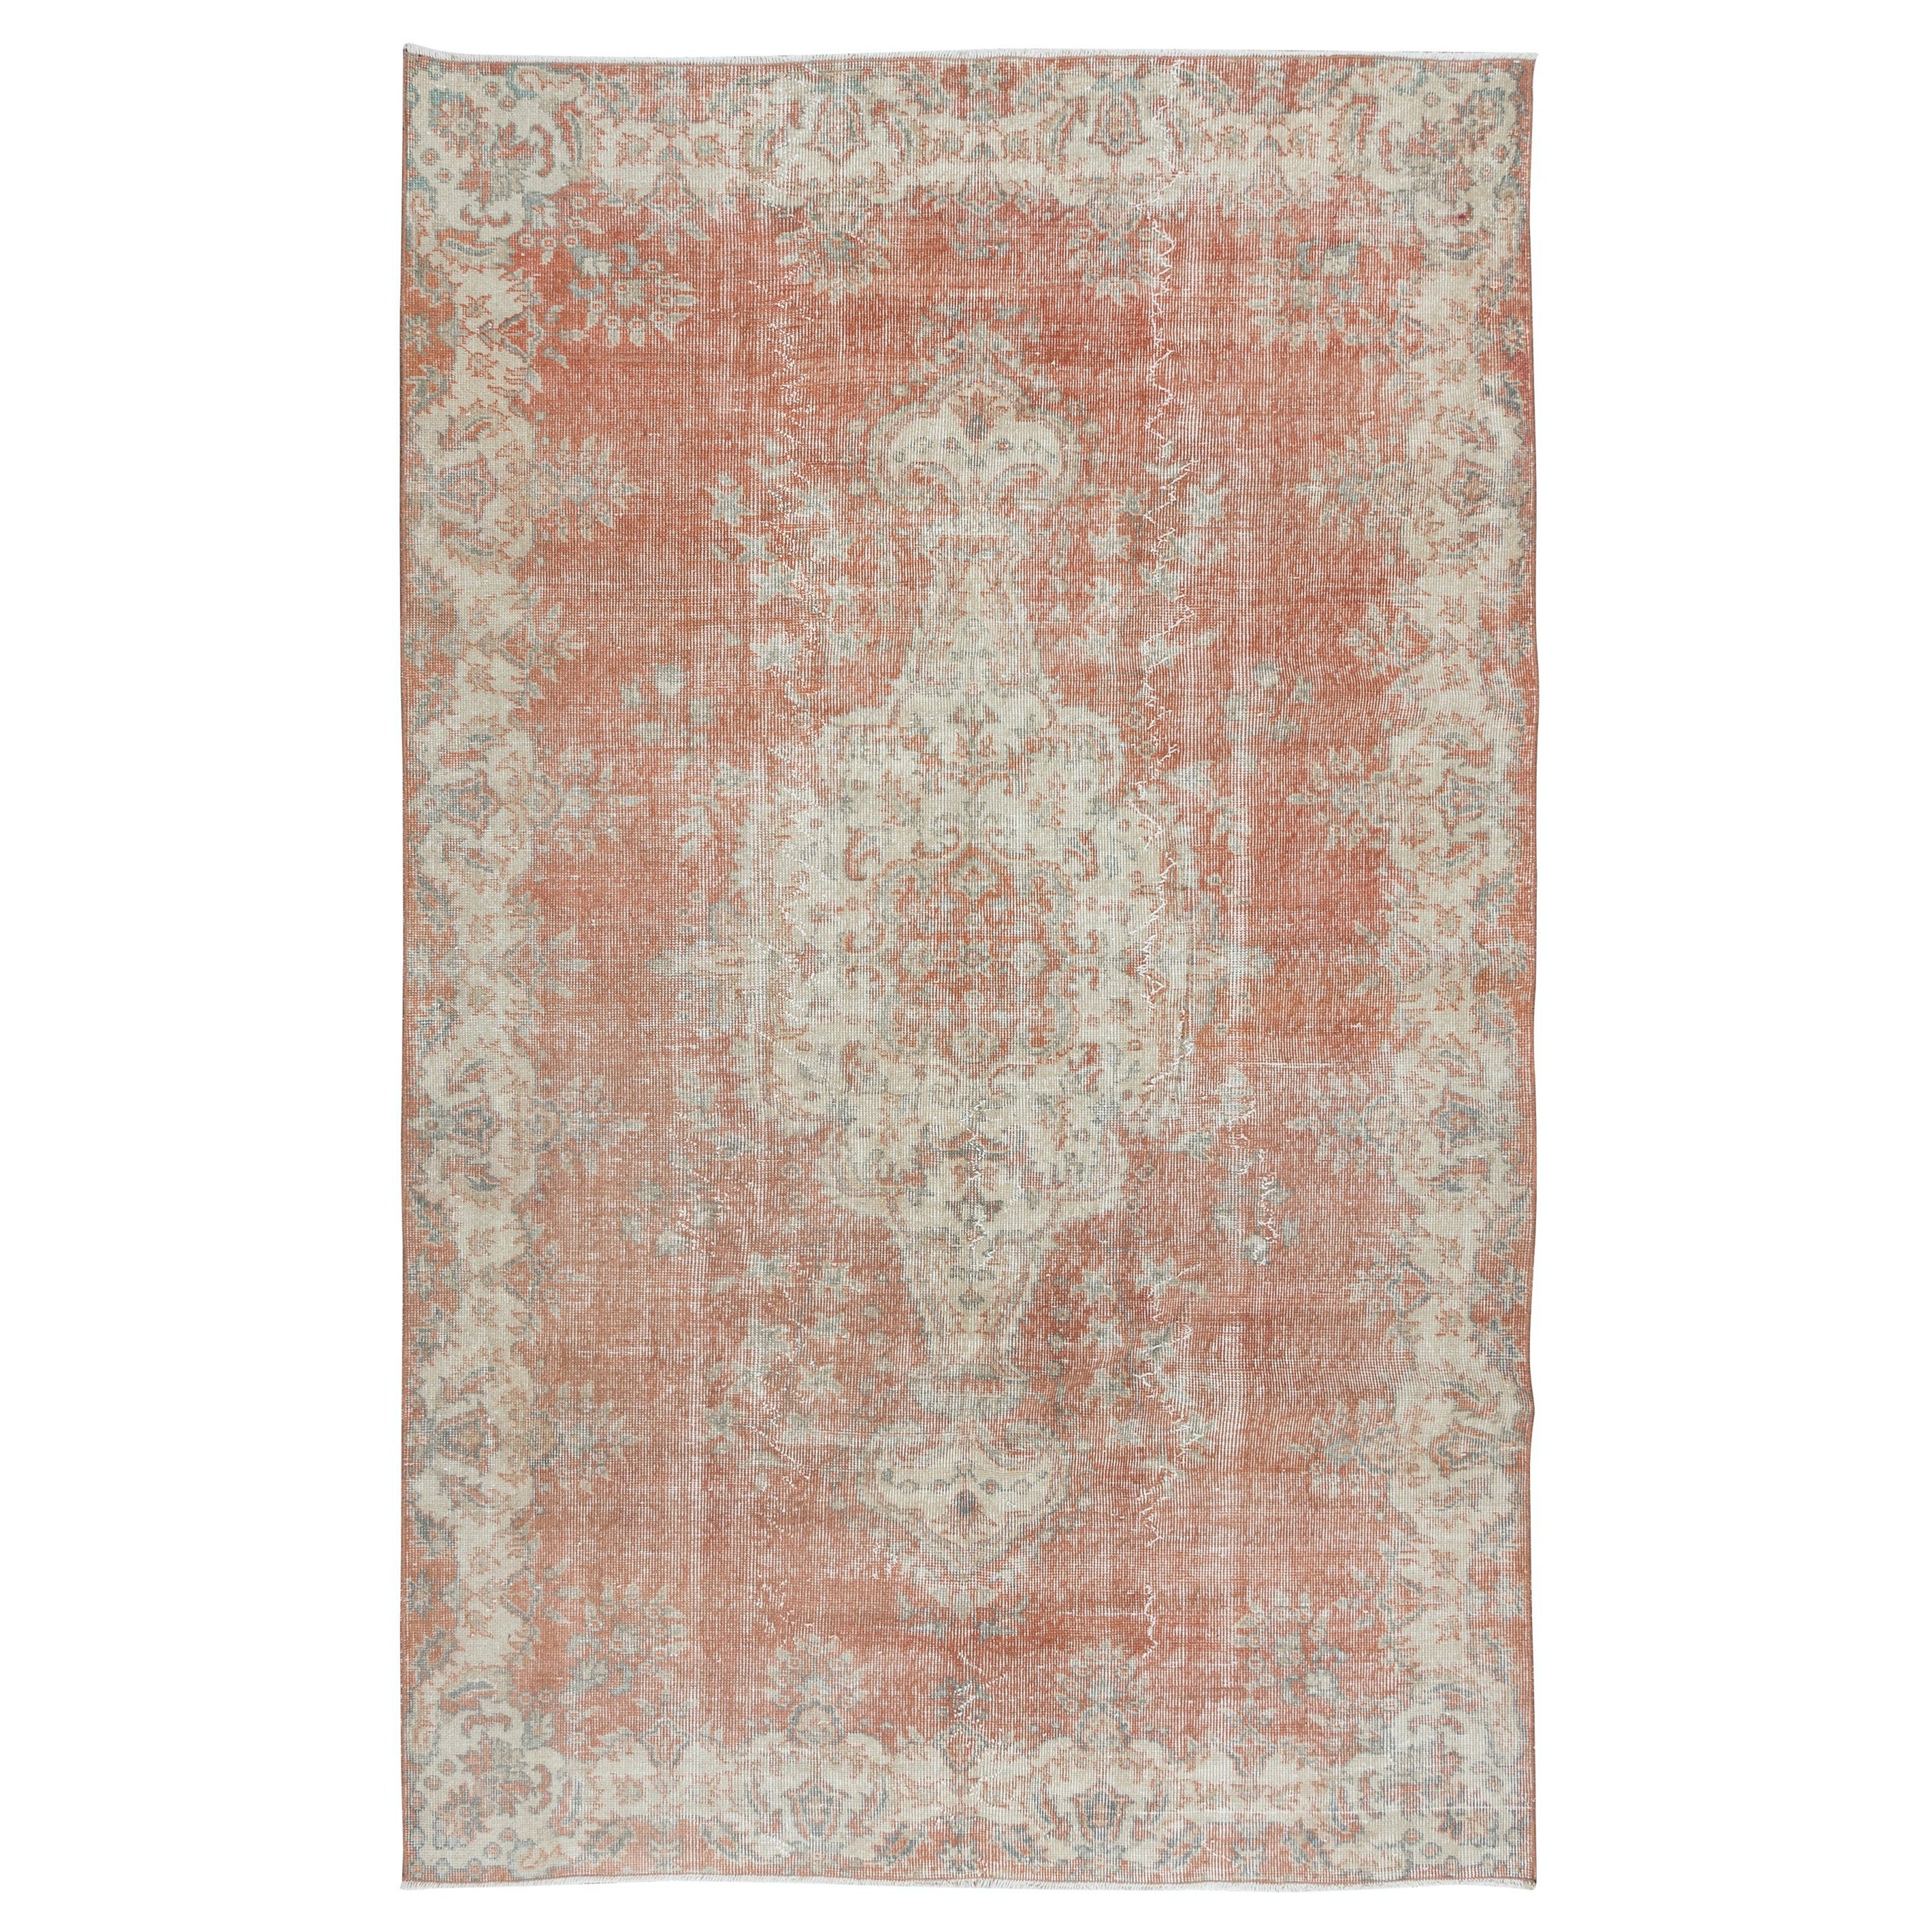 5.6x8.8 Ft Hand Knotted Turkish Area Rug in Beige & Red with Medallion Design For Sale